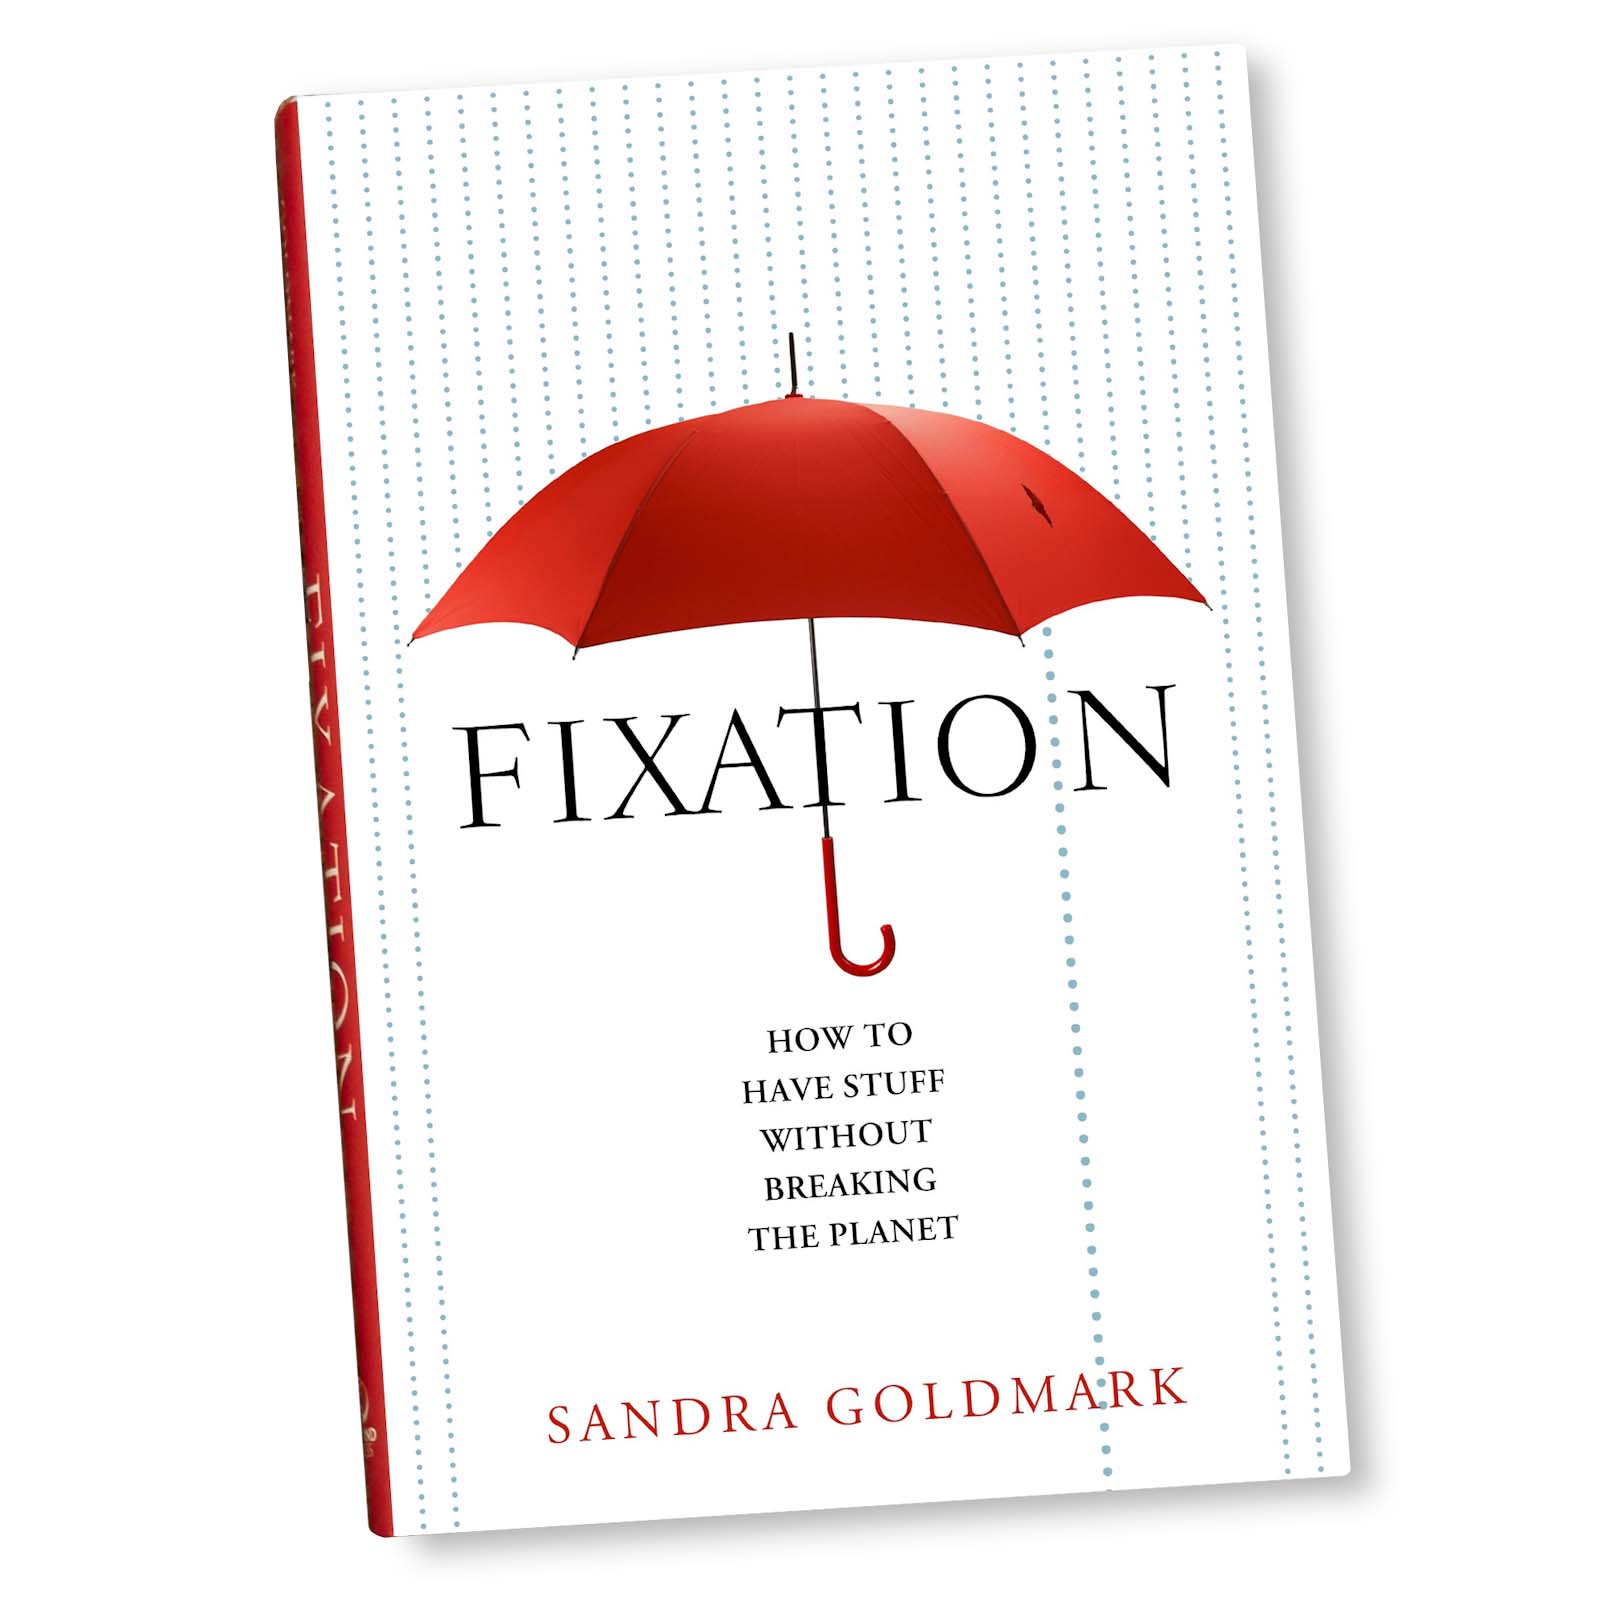 Fixation: How to have stuff without breaking the planet by Sandra Goldmark book cover